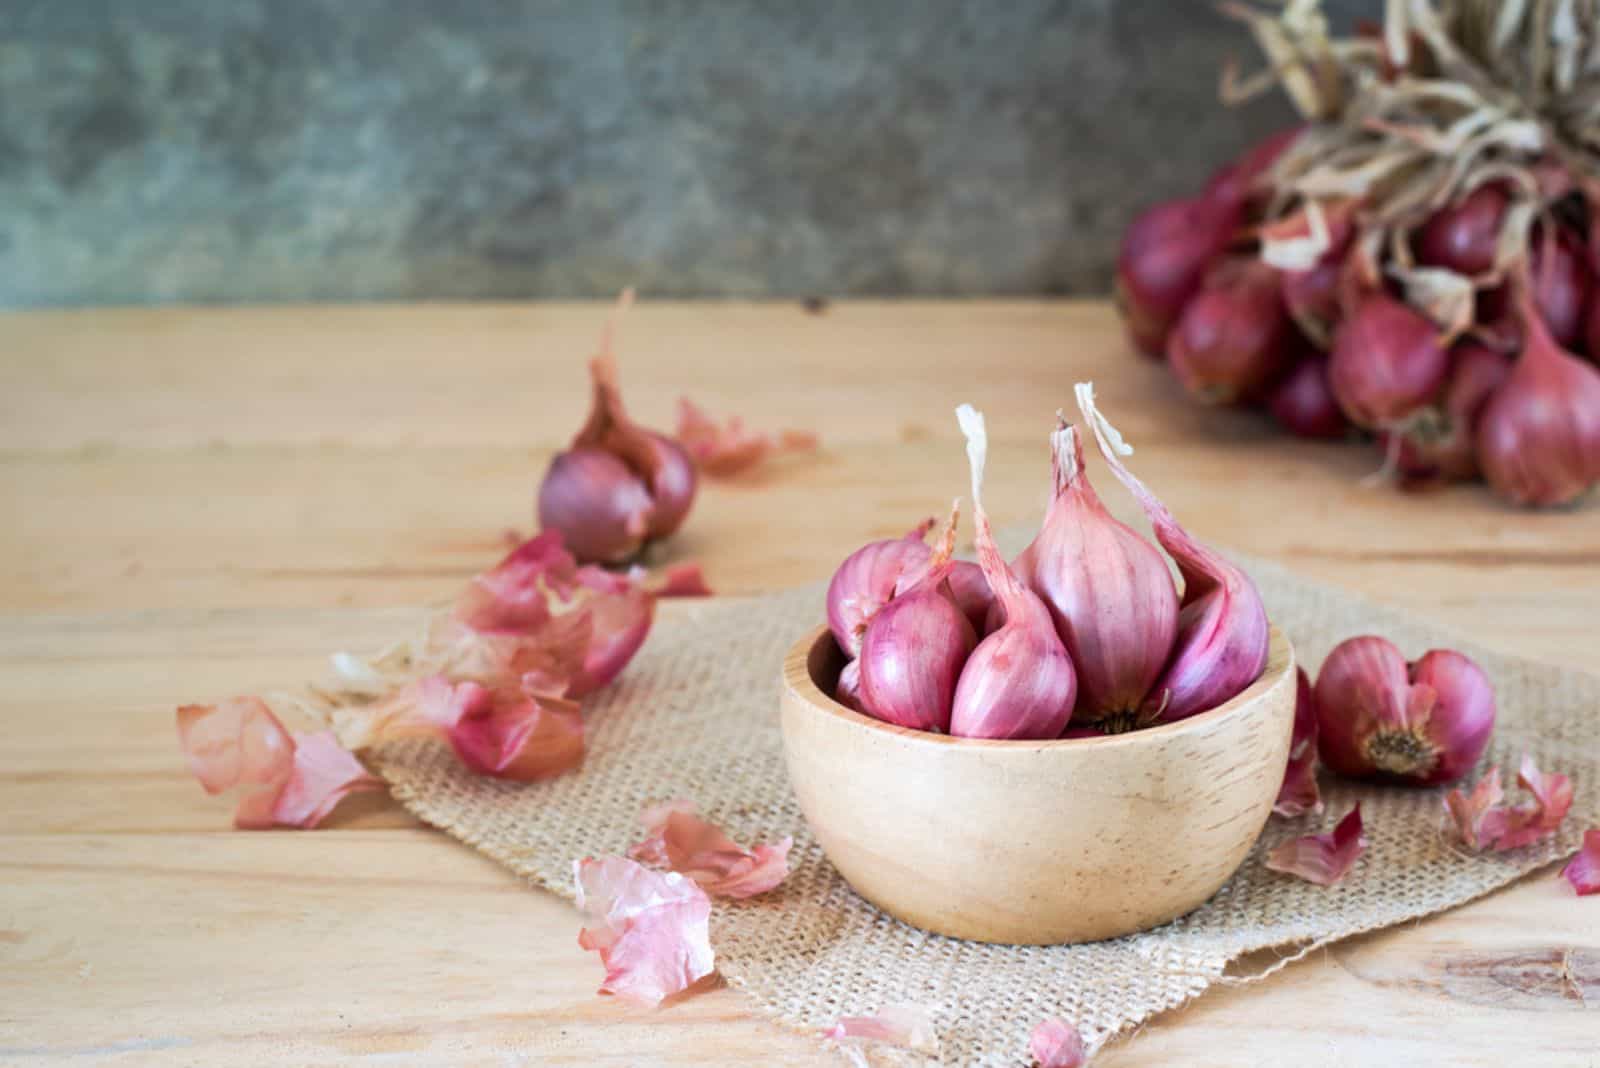 shallots in bowl on old wooden table 